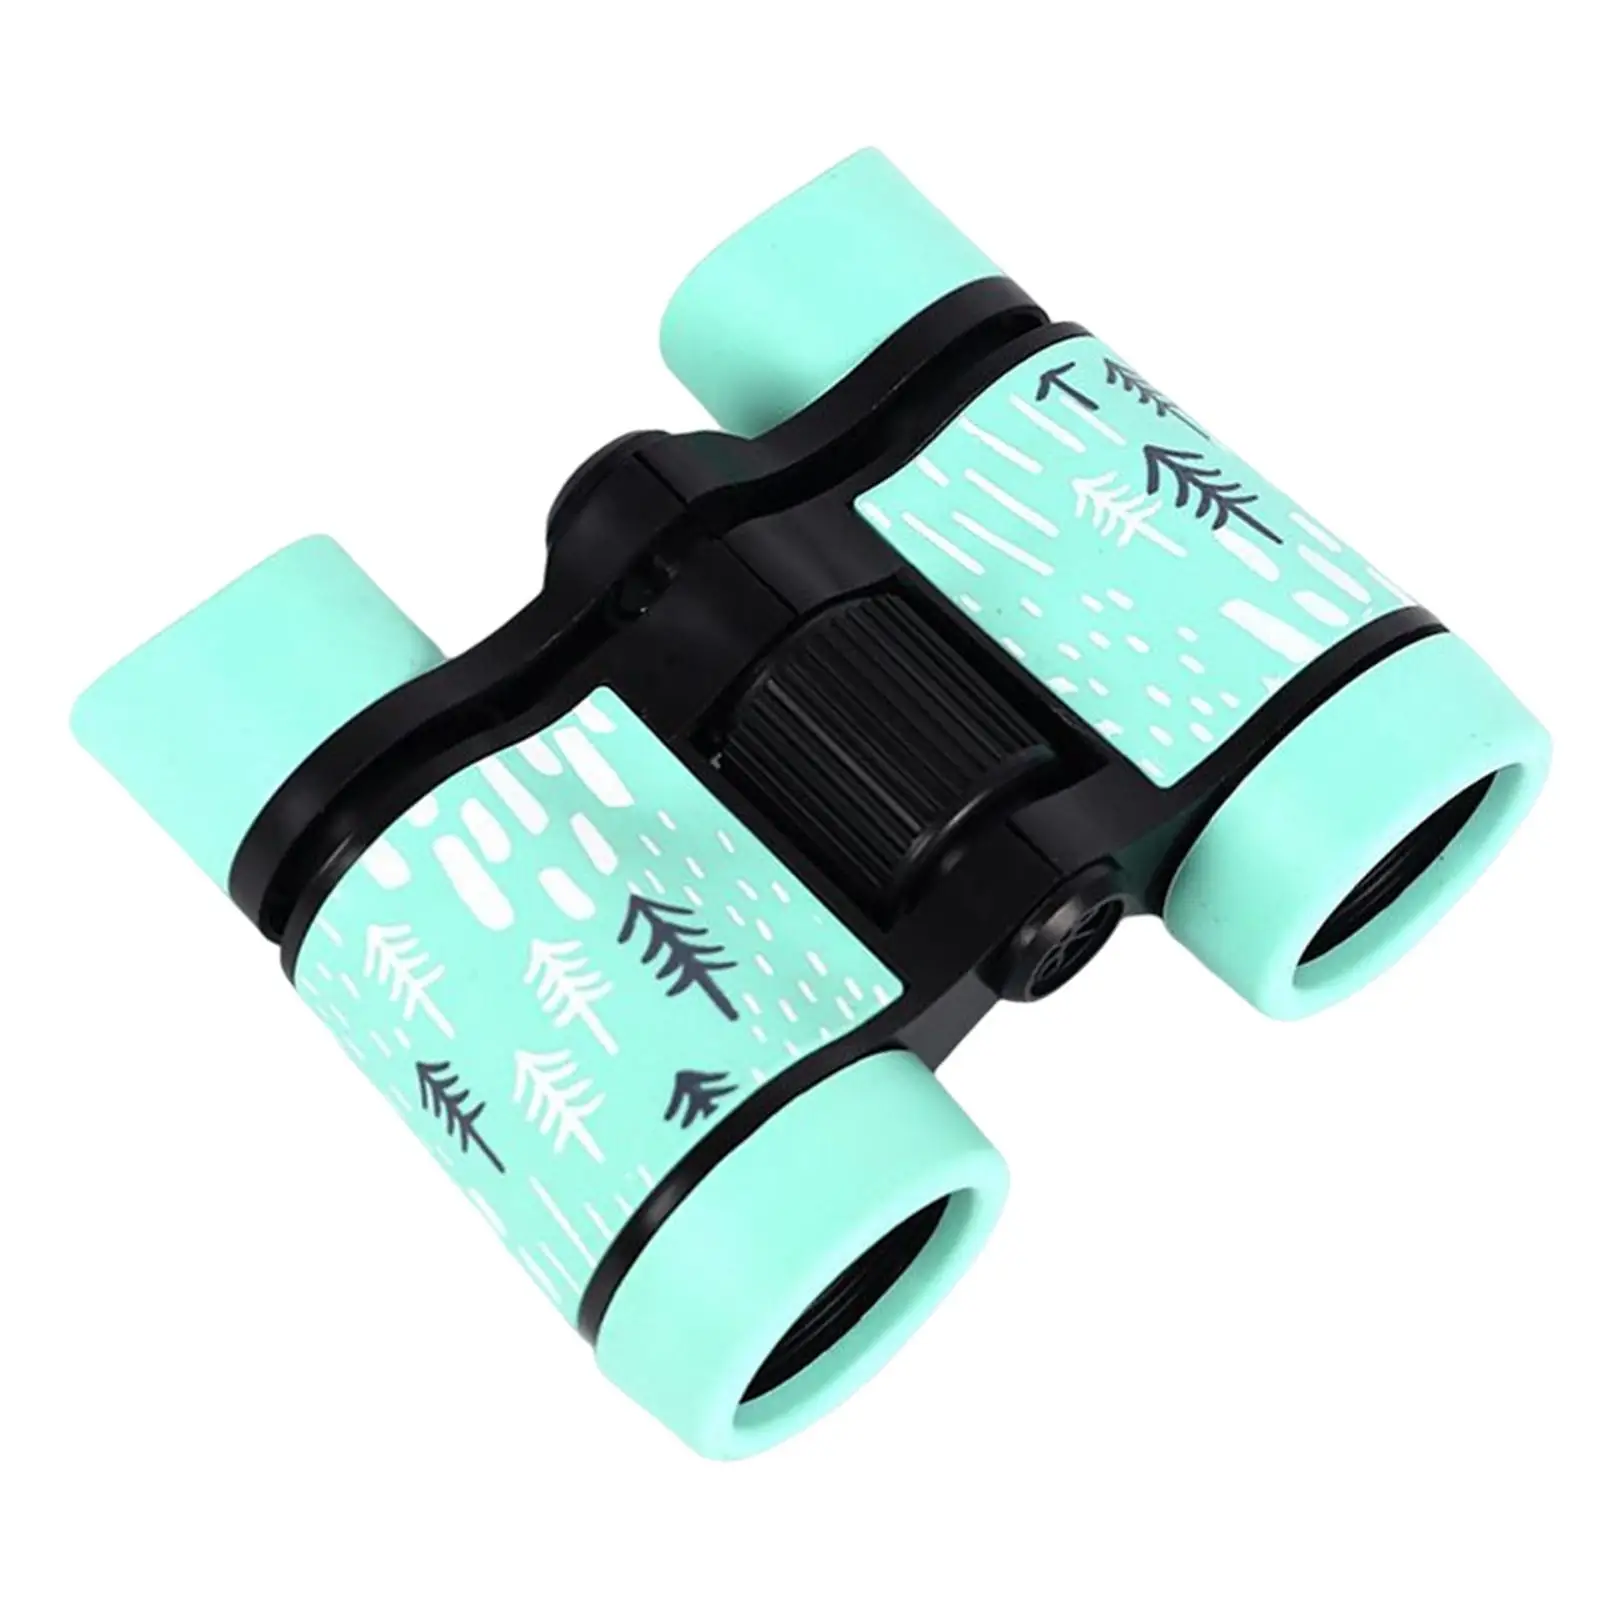 Kids Binocular Foldable Gift Shockproof Educational 4x30mm Compact Telescope Toy for Travel Outdoor Learning Camping Boys Girls